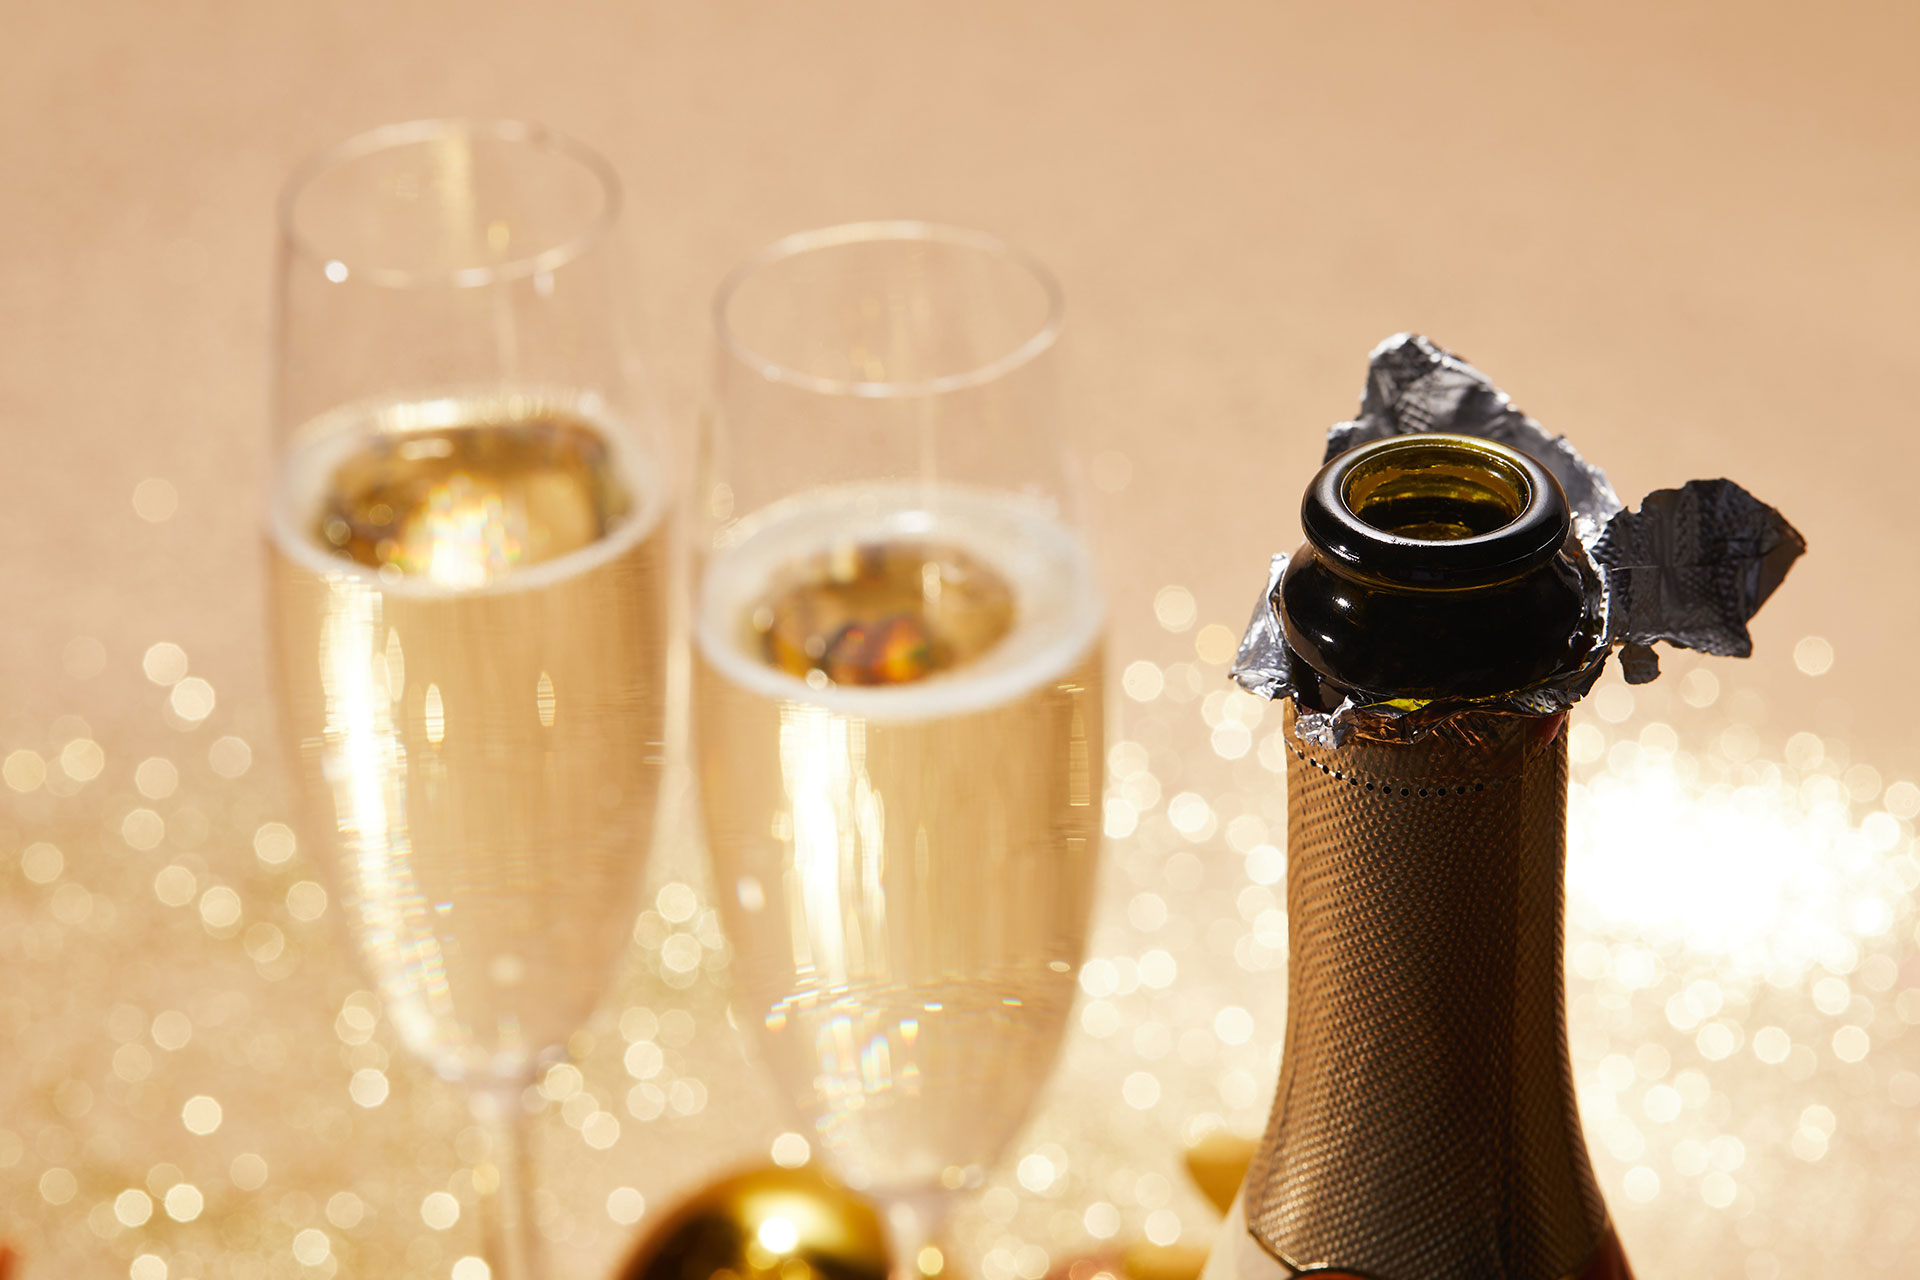 Ring in the New Year with a special getaway